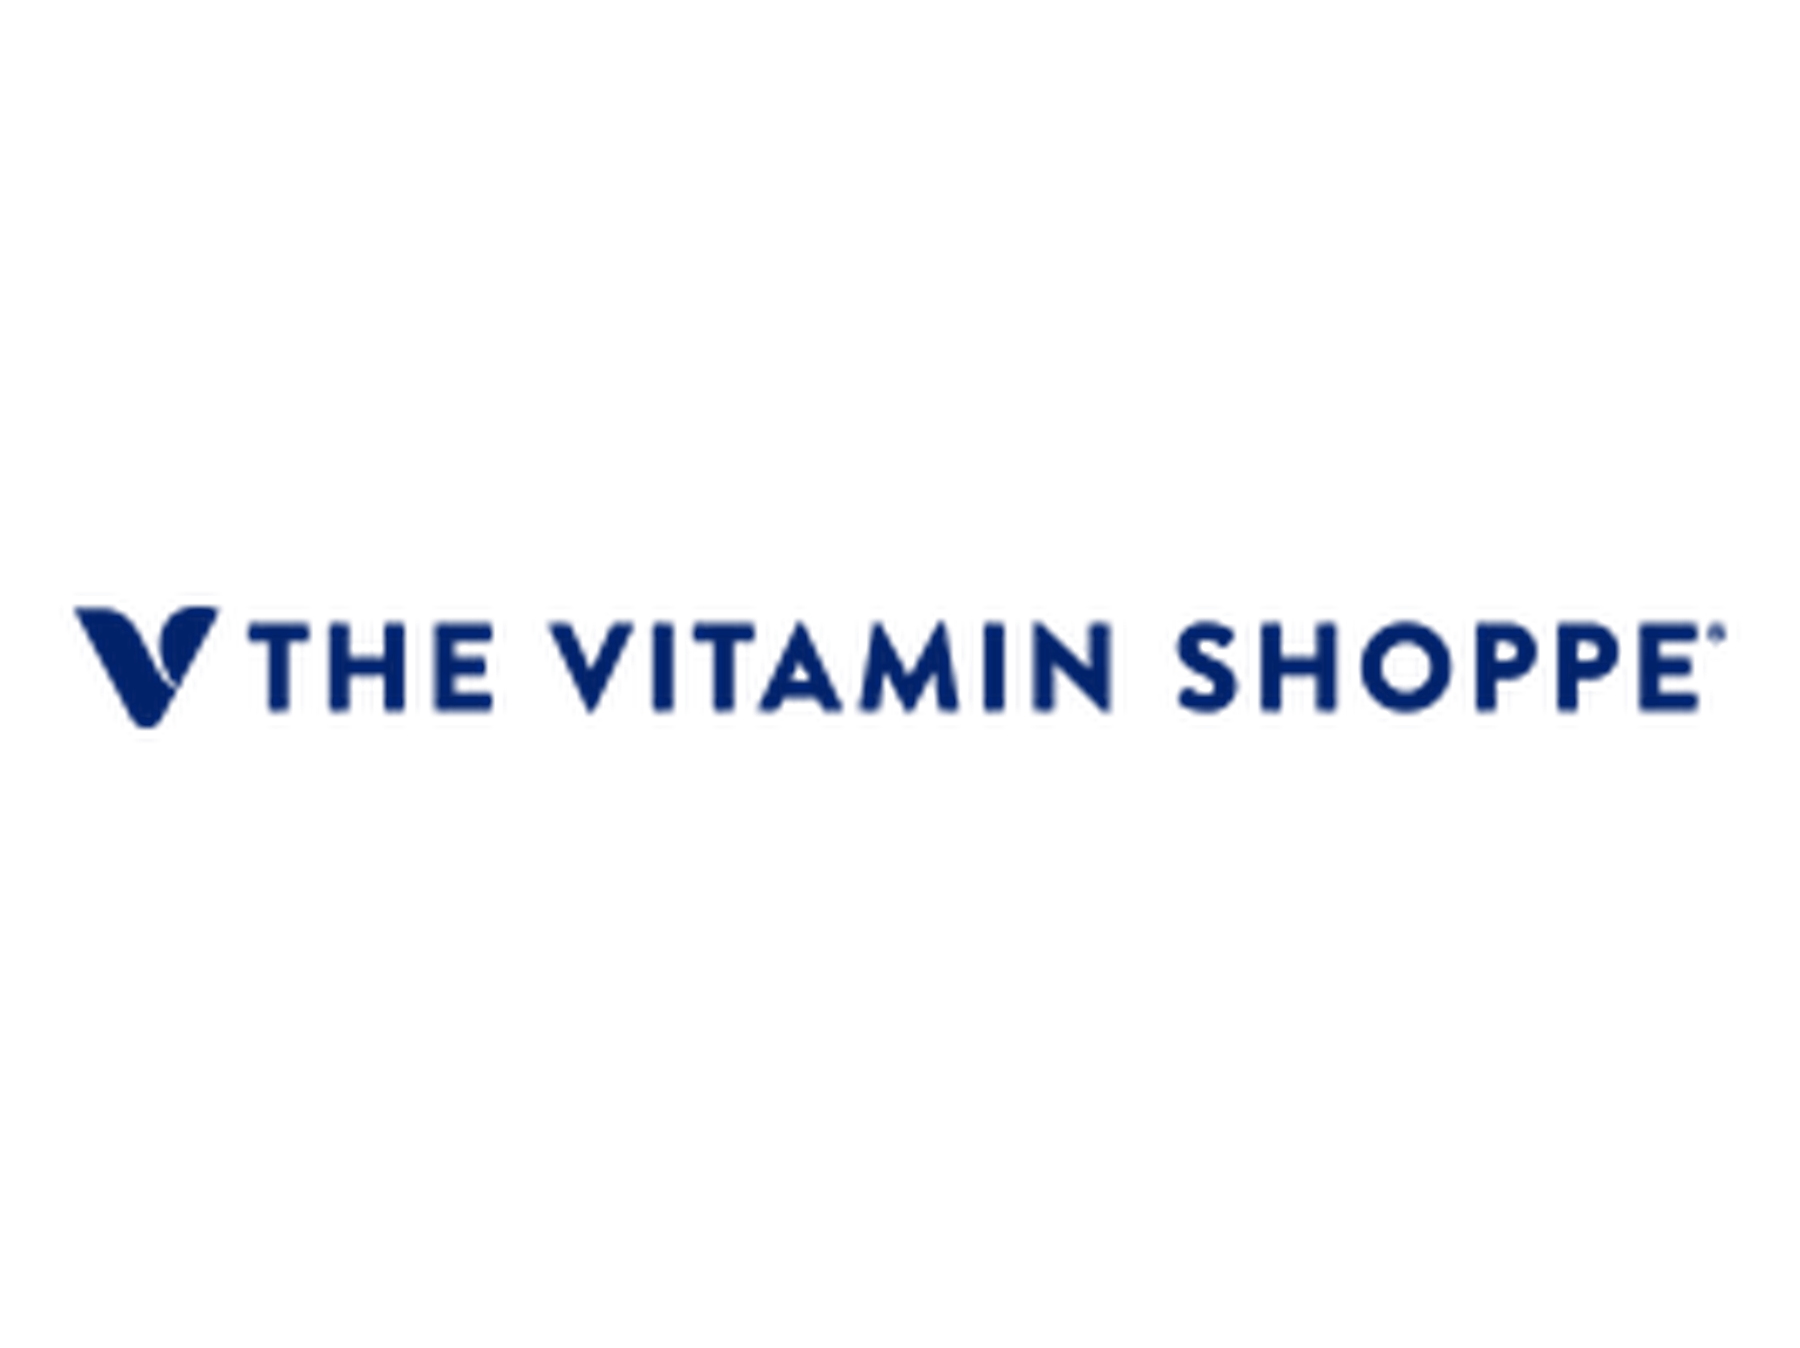 The Vitamin Shoppe Coupons